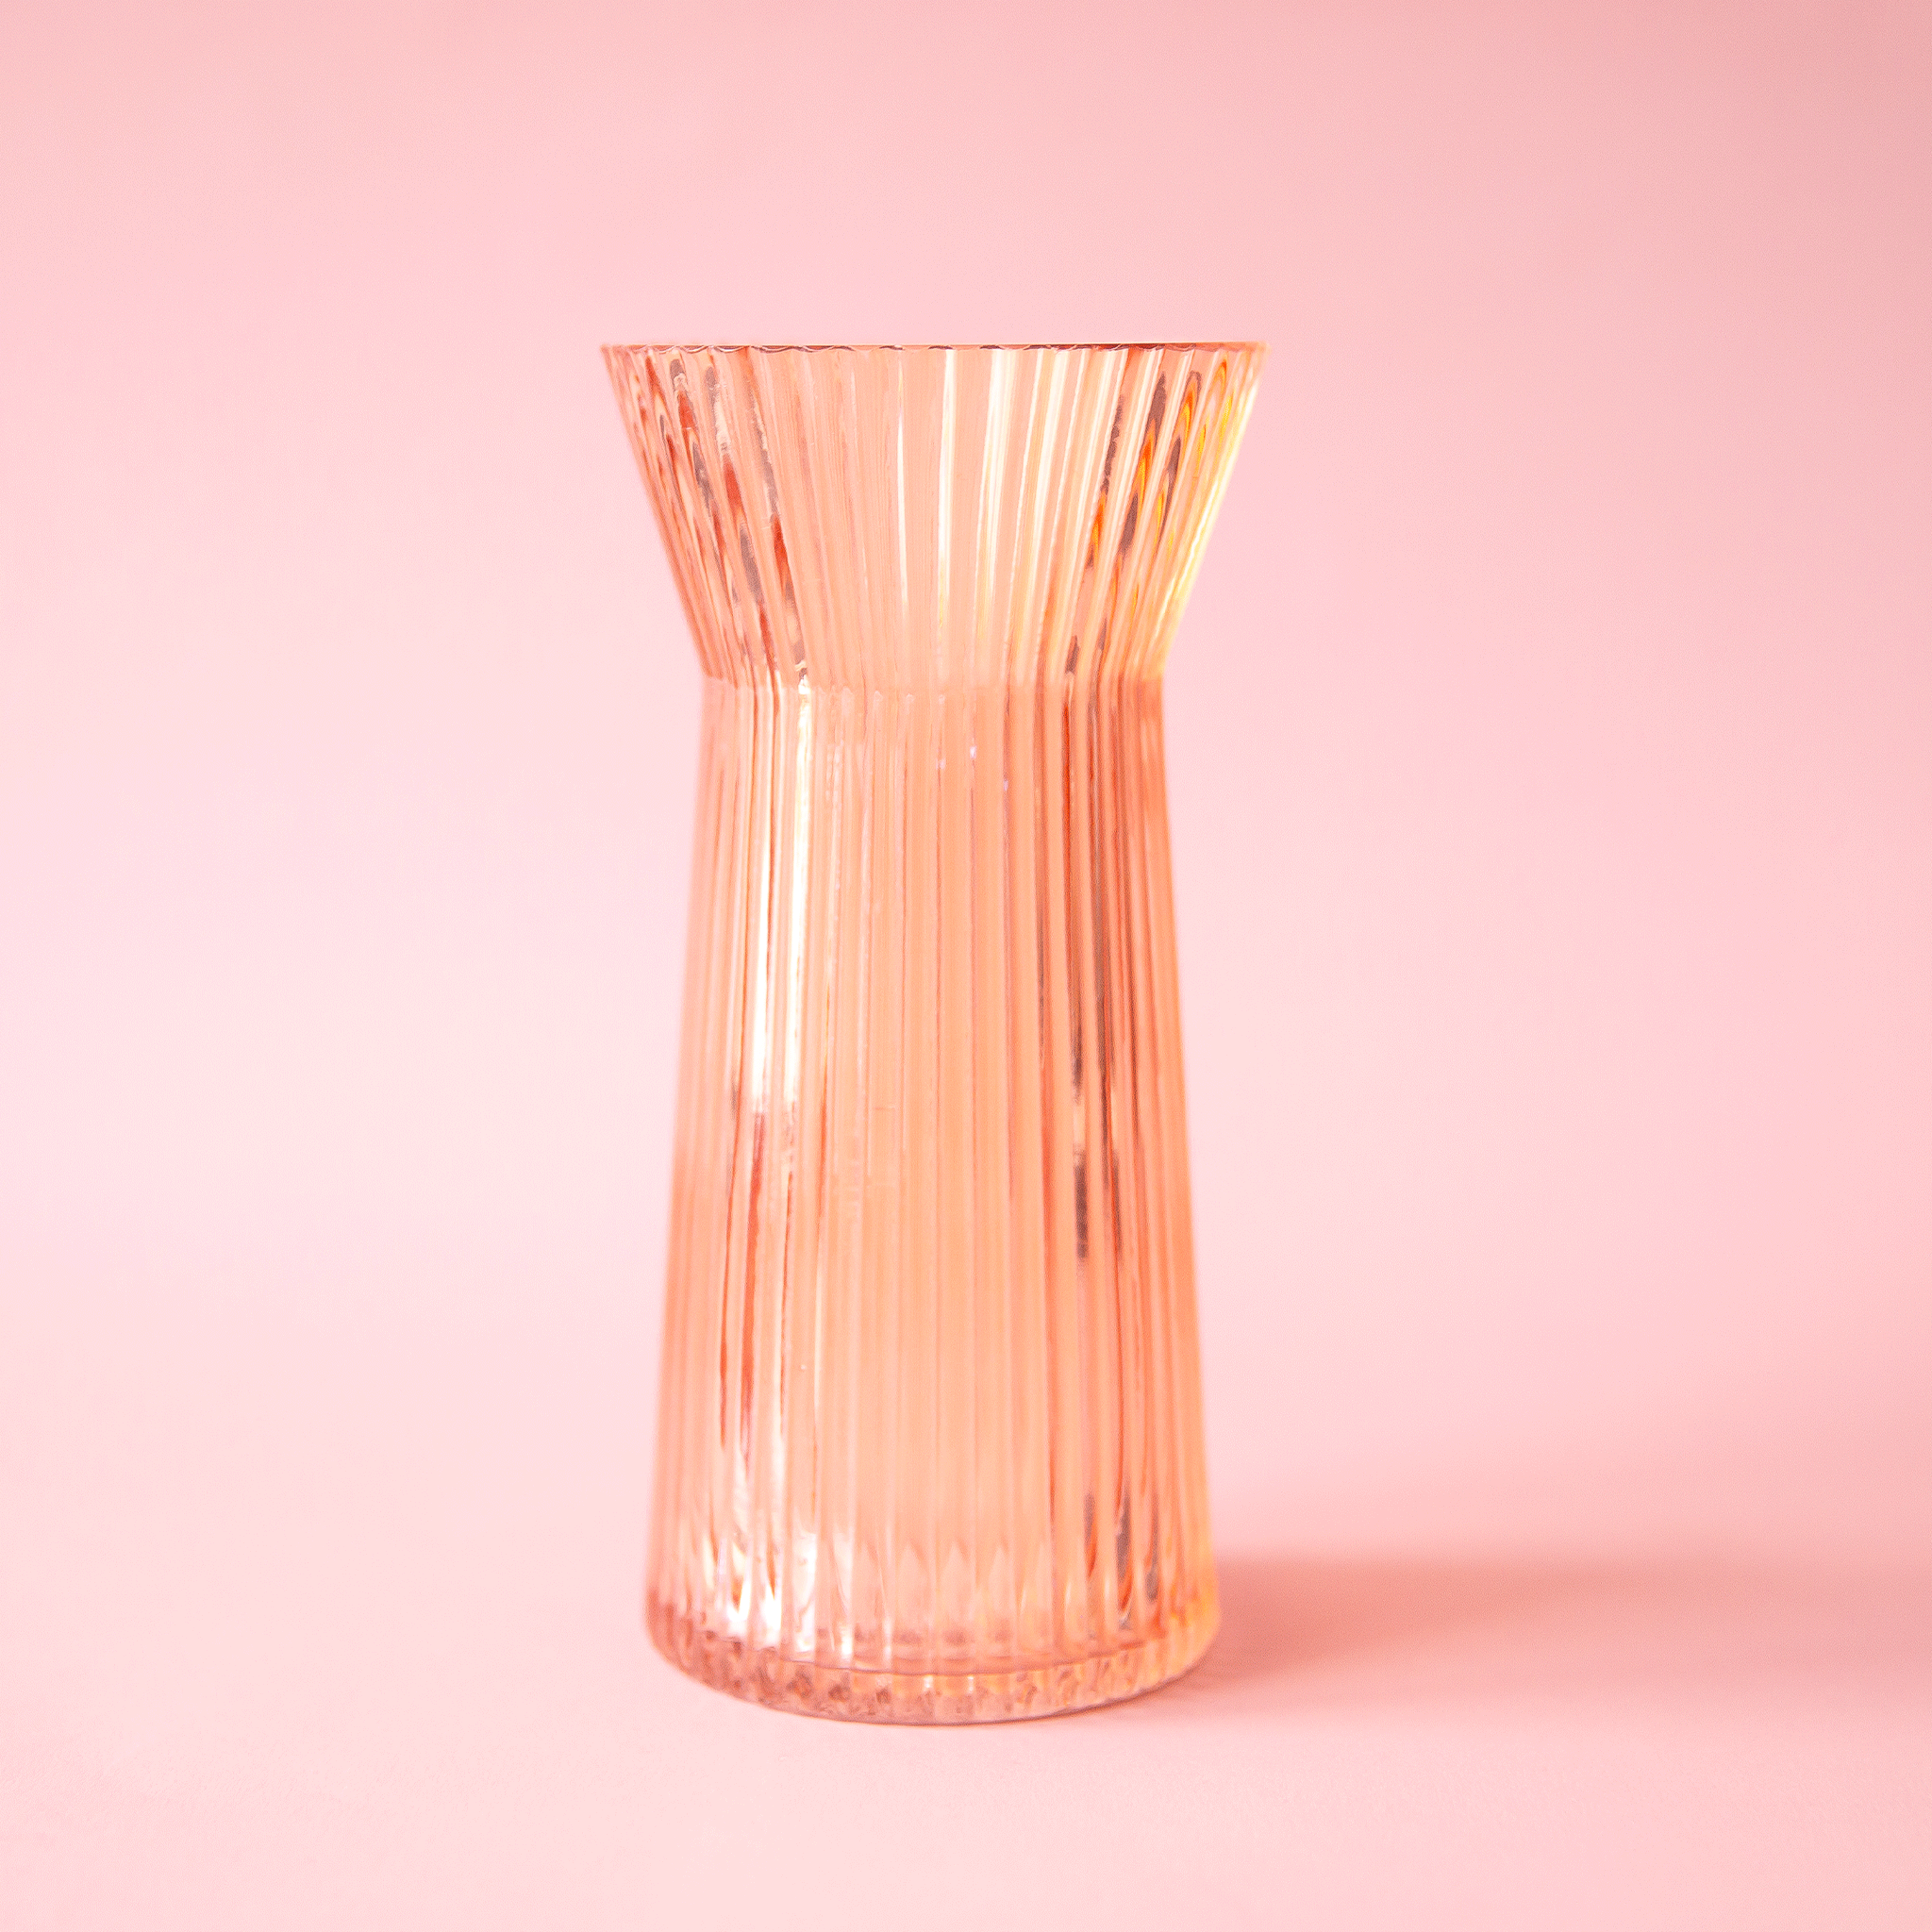 On a pink background is a apricot colored ribbed glass vase.